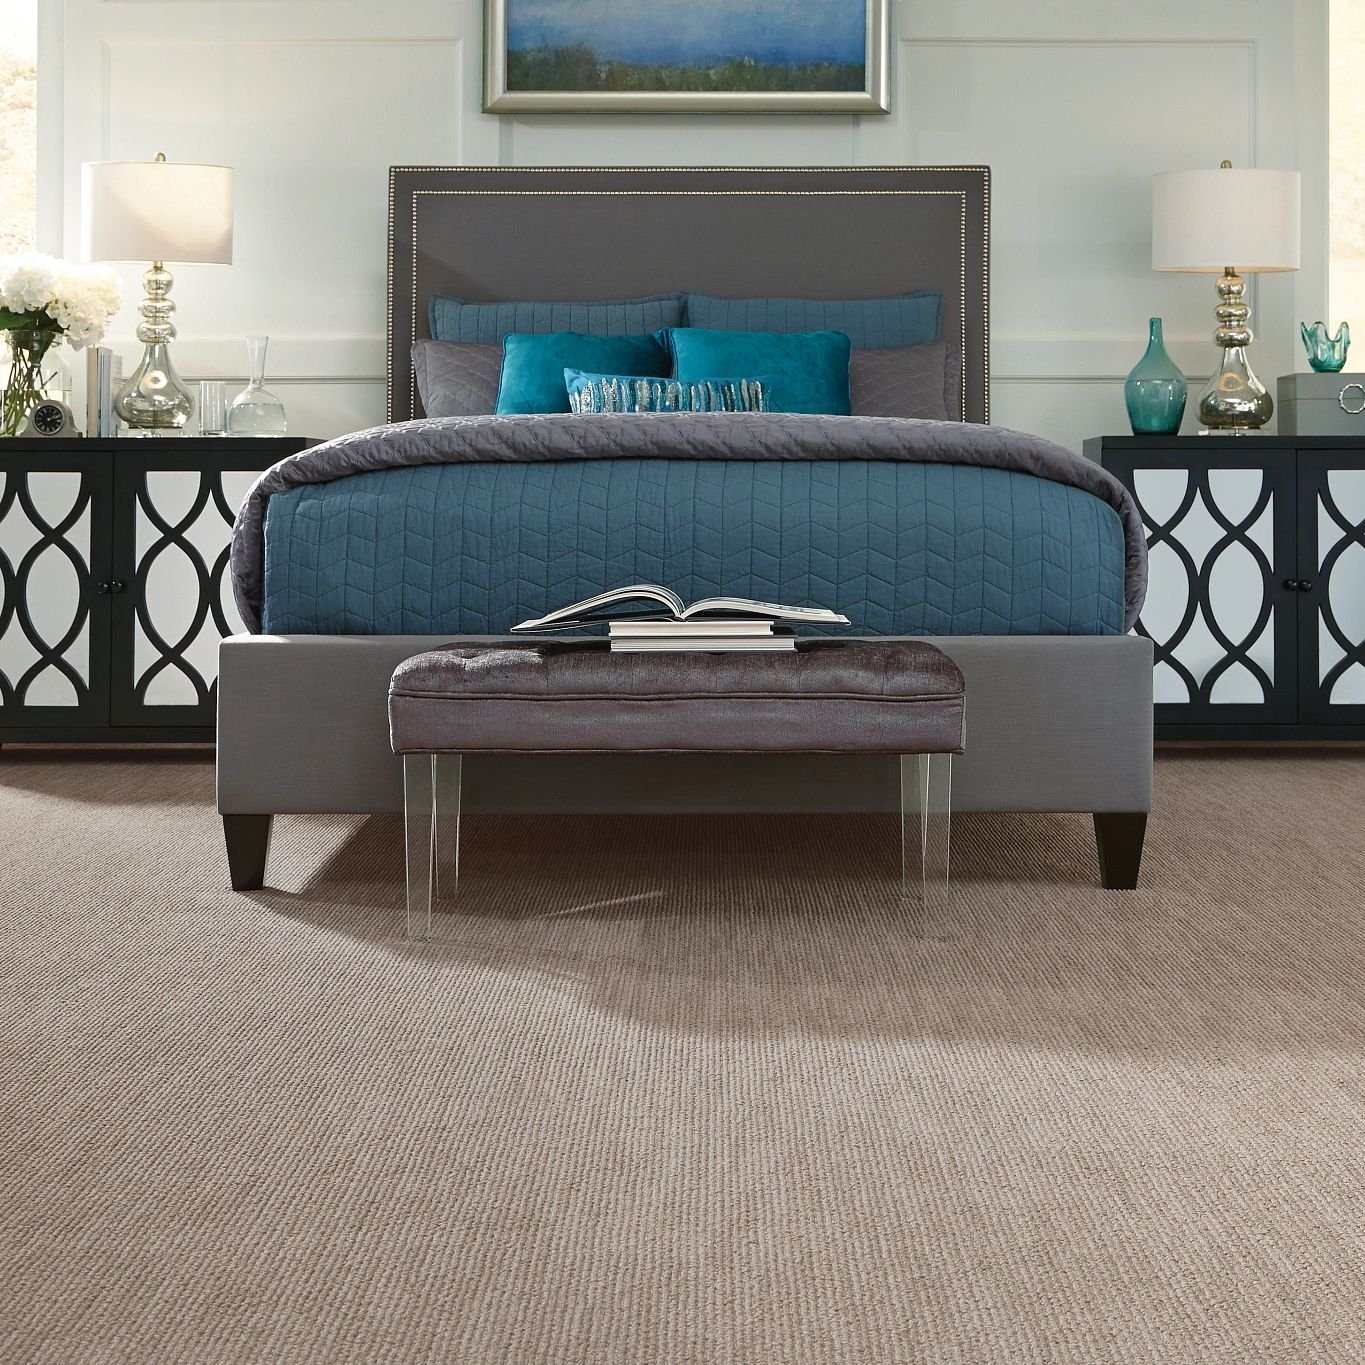 brown carpet flooring for bedroom at Zinz Design and Selection Center Inc in Austintown, OH